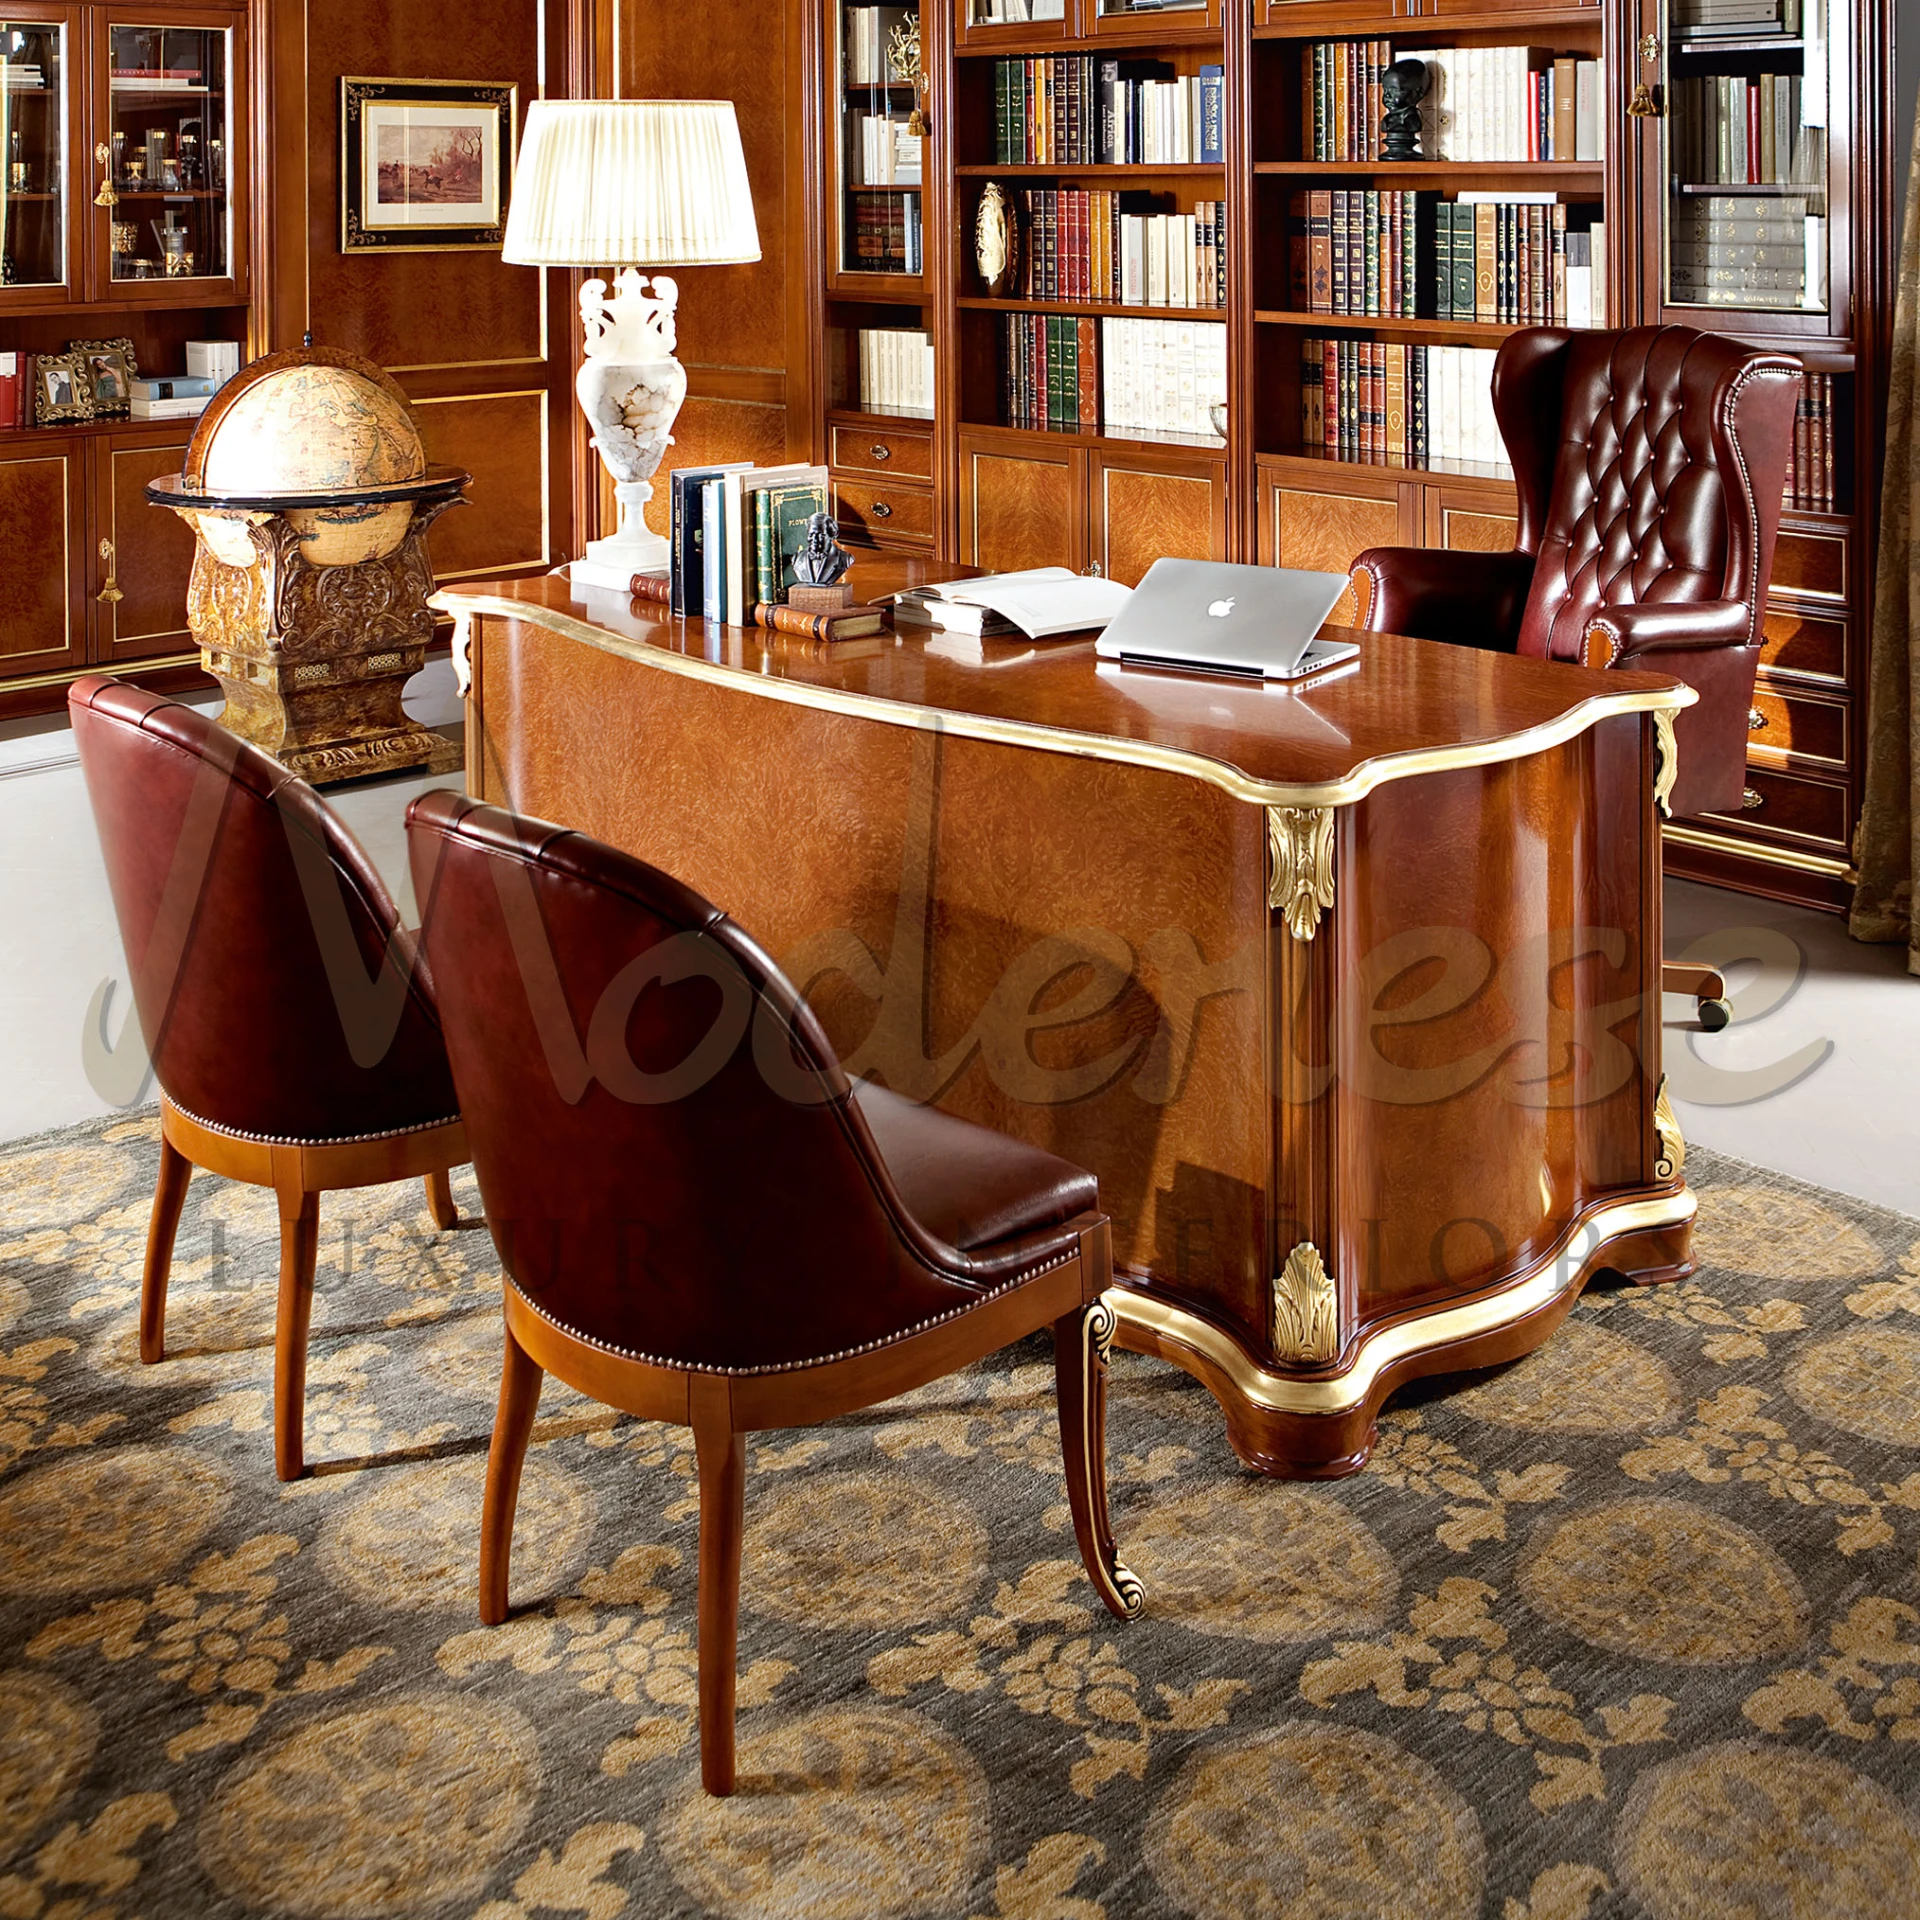 Realistic View in Workspace - President Office Armchair - Office room with a desk, chair, and bookcase.


